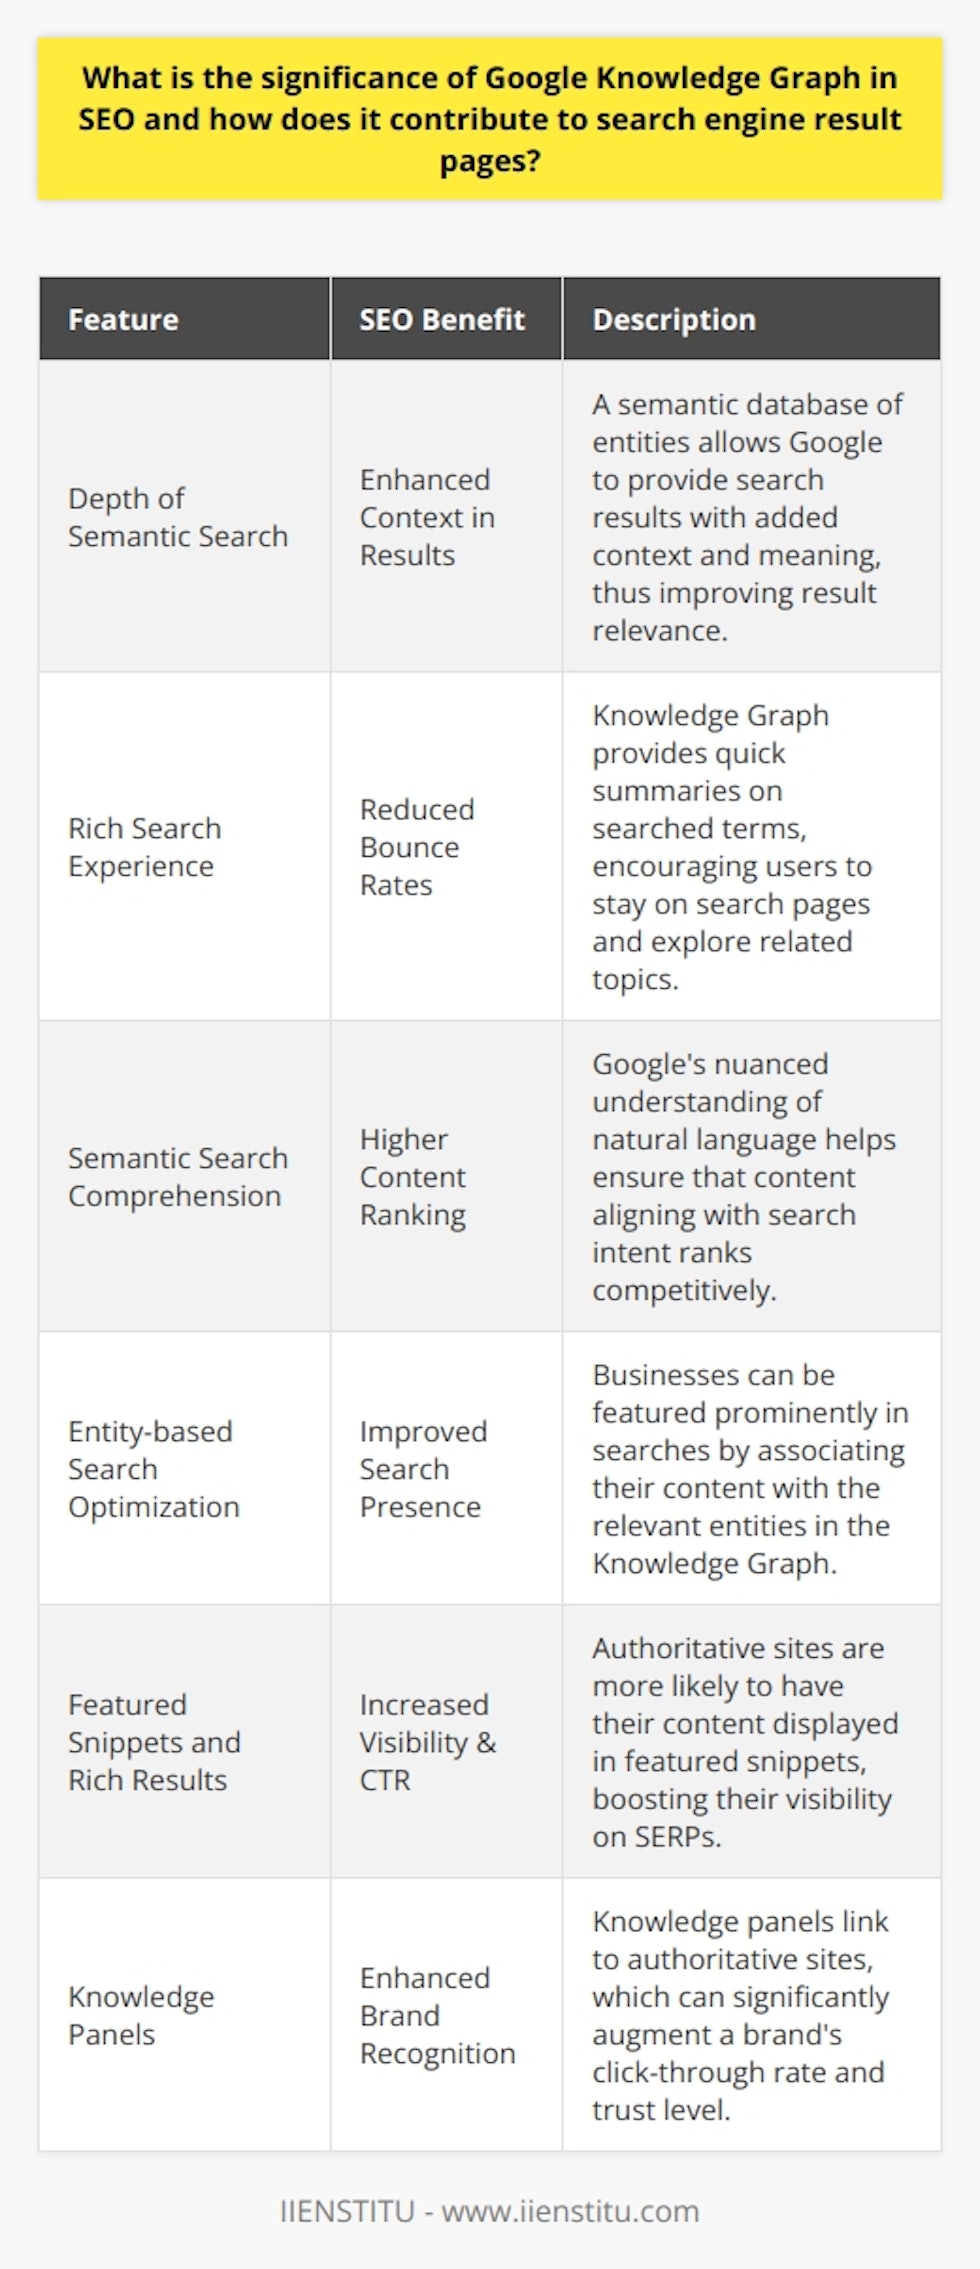 The Google Knowledge Graph stands as an integral part of SEO by enabling a depth of semantic search that traditional keyword-based searches could not offer. By constructing an interconnected database of entities and their relationships, Google Knowledge Graph enhances search results by adding layers of context and meaning, which greatly benefits users and businesses alike.Facilitating a Richer Search ExperienceA user’s search journey is significantly improved with the Knowledge Graph’s ability to display quick, authoritative summaries of searched terms, including public figures, places, events, and organizations. This immediate provision of factual information keeps users on search pages longer and introduces them to related topics, which can reduce bounce rates—a positive signal to Google’s ranking algorithms.Empowering Semantic SearchSemantic search is a process through which search engines understand user intent and the contextual meaning of terms to generate more relevant search results. With the Knowledge Graph, Google has made strides in comprehending the nuances of natural language, ensuring that content which matches the intent behind a search query is more likely to rank higher. Optimizing content to align with related entities and providing comprehensive information about specific topics thus becomes pivotal in outranking competitors.Augmenting Entity-Based SearchSEO strategy can benefit immensely from understanding how entities are categorized within the Knowledge Graph. By associating a website or brand with distinct, relevant entities, businesses can improve their chances of being prominently featured in related searches. For instance, a local eatery can enhance its digital footprint by clearly aligning with entities such as the locality it serves, the cuisine it offers, and the experience it provides.Optimizing for Featured Snippets and Rich ResultsThe Knowledge Graph can directly impact the presentation of featured snippets and rich results on SERPs, which can dramatically increase visibility and click-through rates. When search engines understand and trust the content of a particular site, they are more likely to pull data from it for rich results. Thus, being recognized by the Knowledge Graph as an authoritative source for specific entities contributes to gaining this type of SERP real estate.Driving Click-Throughs with Knowledge PanelsKnowledge panels, powered by the Knowledge Graph, display prominent blocks of information and are valuable for brand recognition and trust. Websites linked from these panels often experience higher click-through rates as they are perceived as authoritative by users. For a brand, maintaining accurate and current information on the Knowledge Graph is therefore essential in leveraging its SEO value.In summation, the Google Knowledge Graph is a significant ally in search engine optimization, enabling a more nuanced, contextual, and user-focused approach to appearing in search results. By adopting the Knowledge Graph into their SEO tactics, marketers are better equipped to improve their visibility, traffic, and user engagement, giving them the edge in the ever-evolving digital environment.